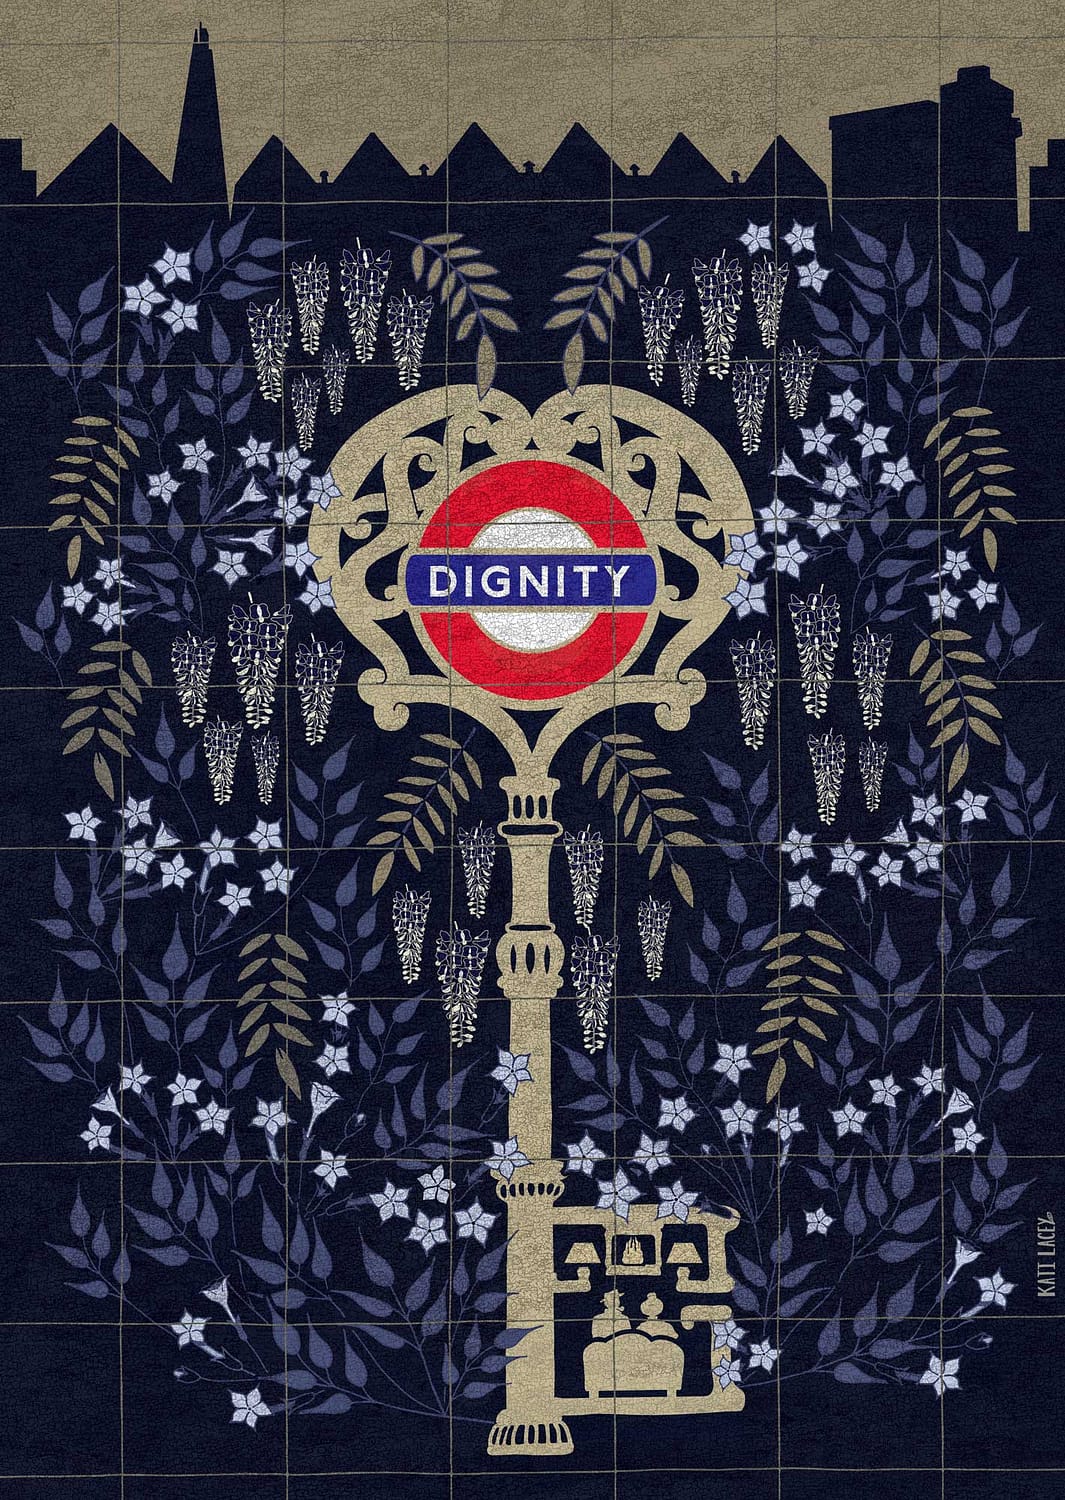 kati-lacey-illustration-editorial-conceptual-poster-red cross garden-Octavia Hill-dignity-dignified housing-social reformer-Victorian-everyday-heroes-flowers-garden- open-air living room-tiles-illustration